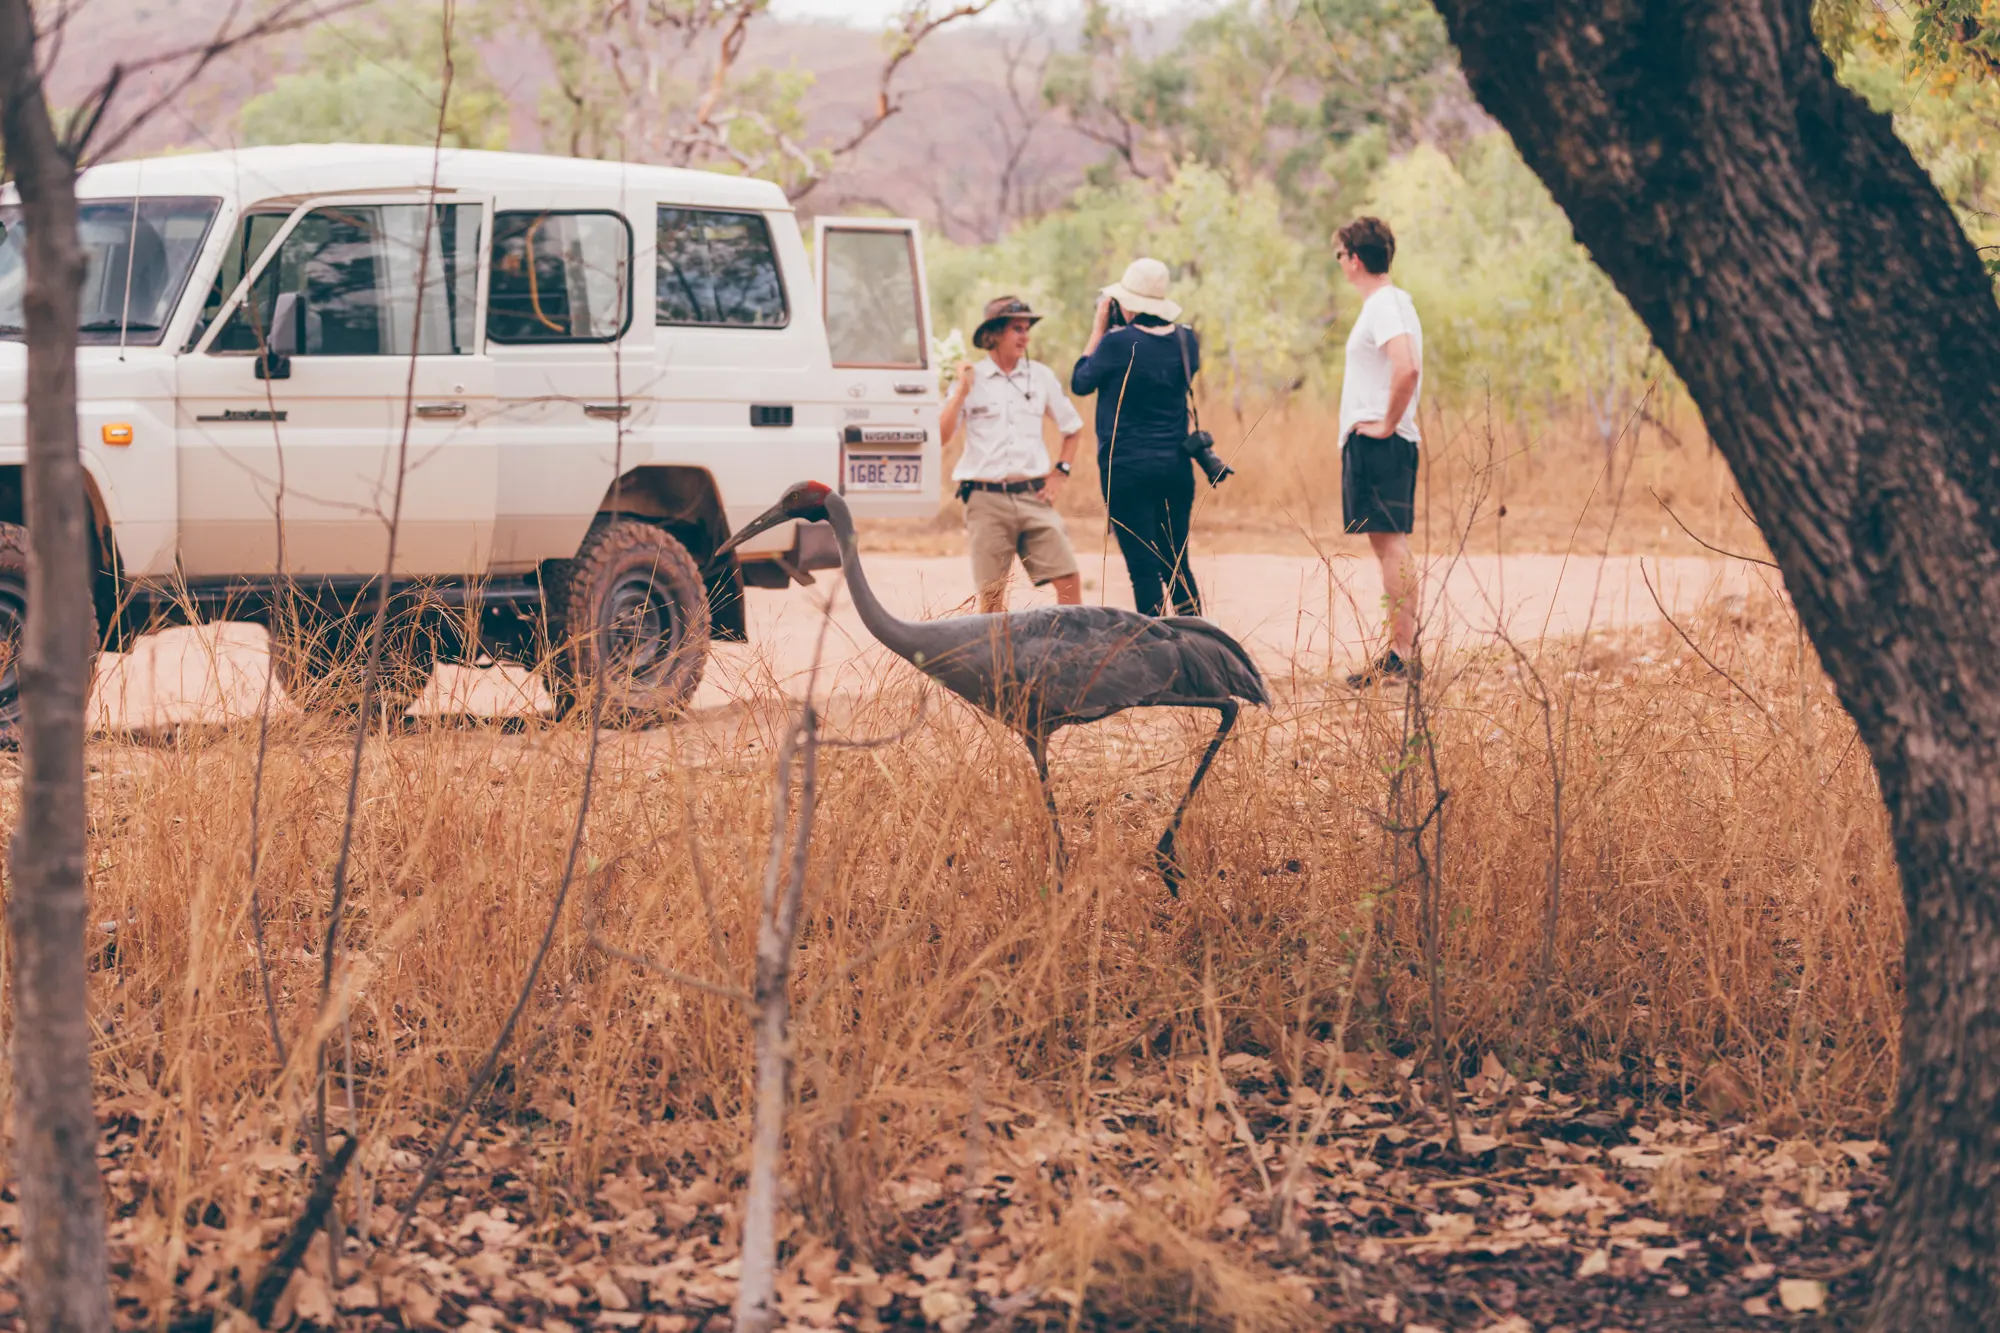 Brolga bird in scrub with guests in the background.